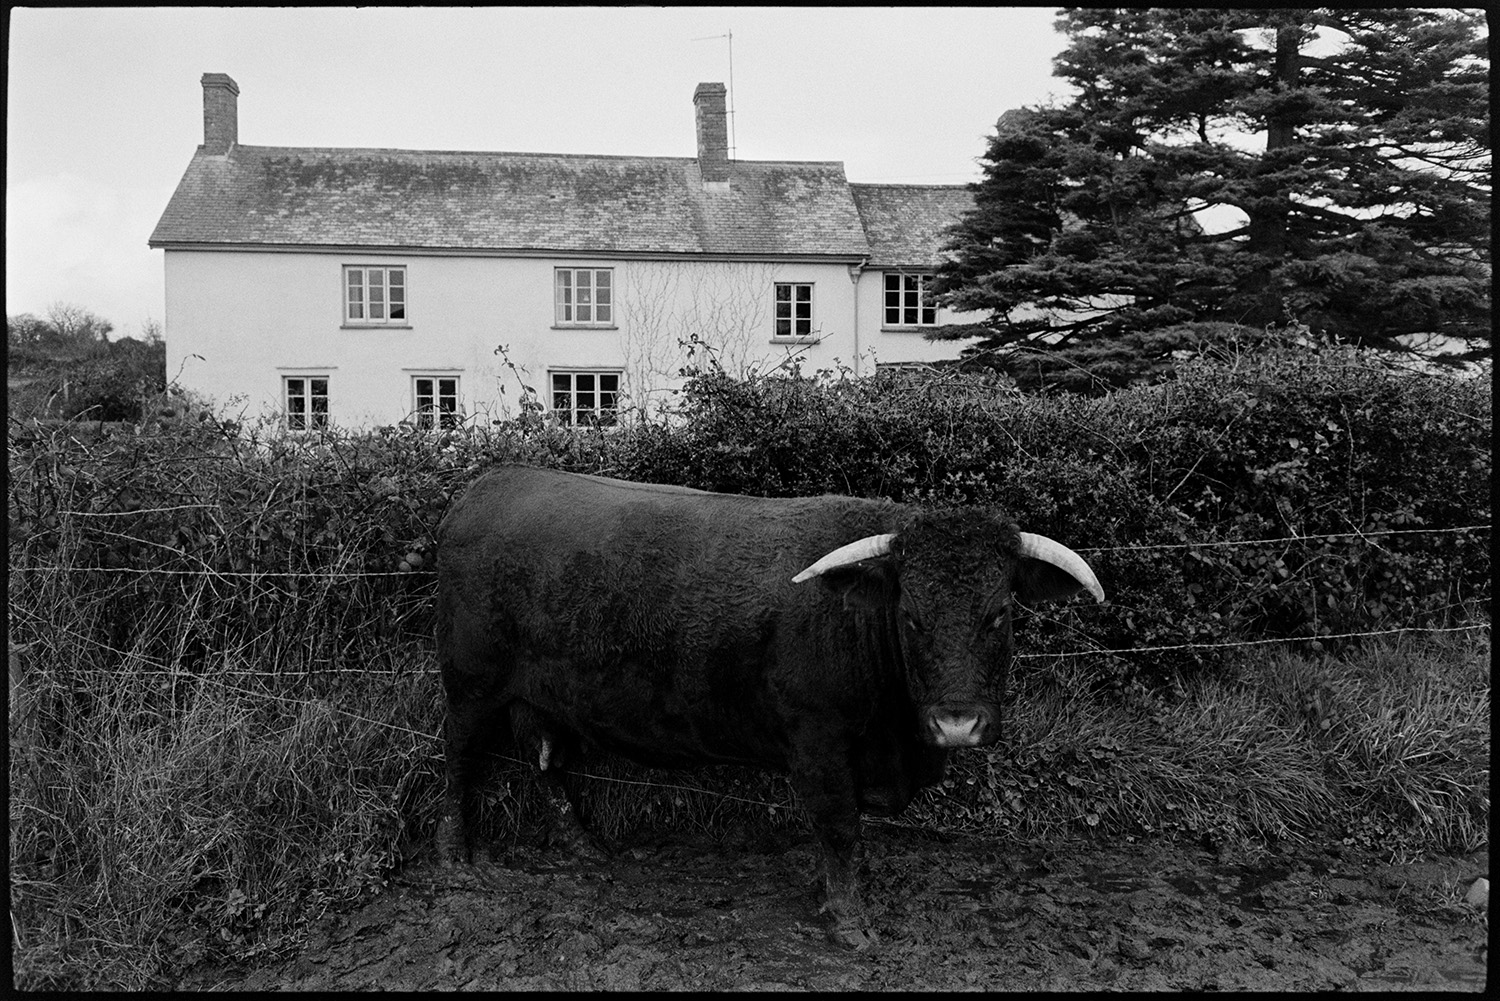 Horned cow, Devon Peron Red in muddy field. 
[A Devon Peron Red cow with horns in a muddy field at Narracott, Hollocombe. A house can be seen behind the field hedge.]